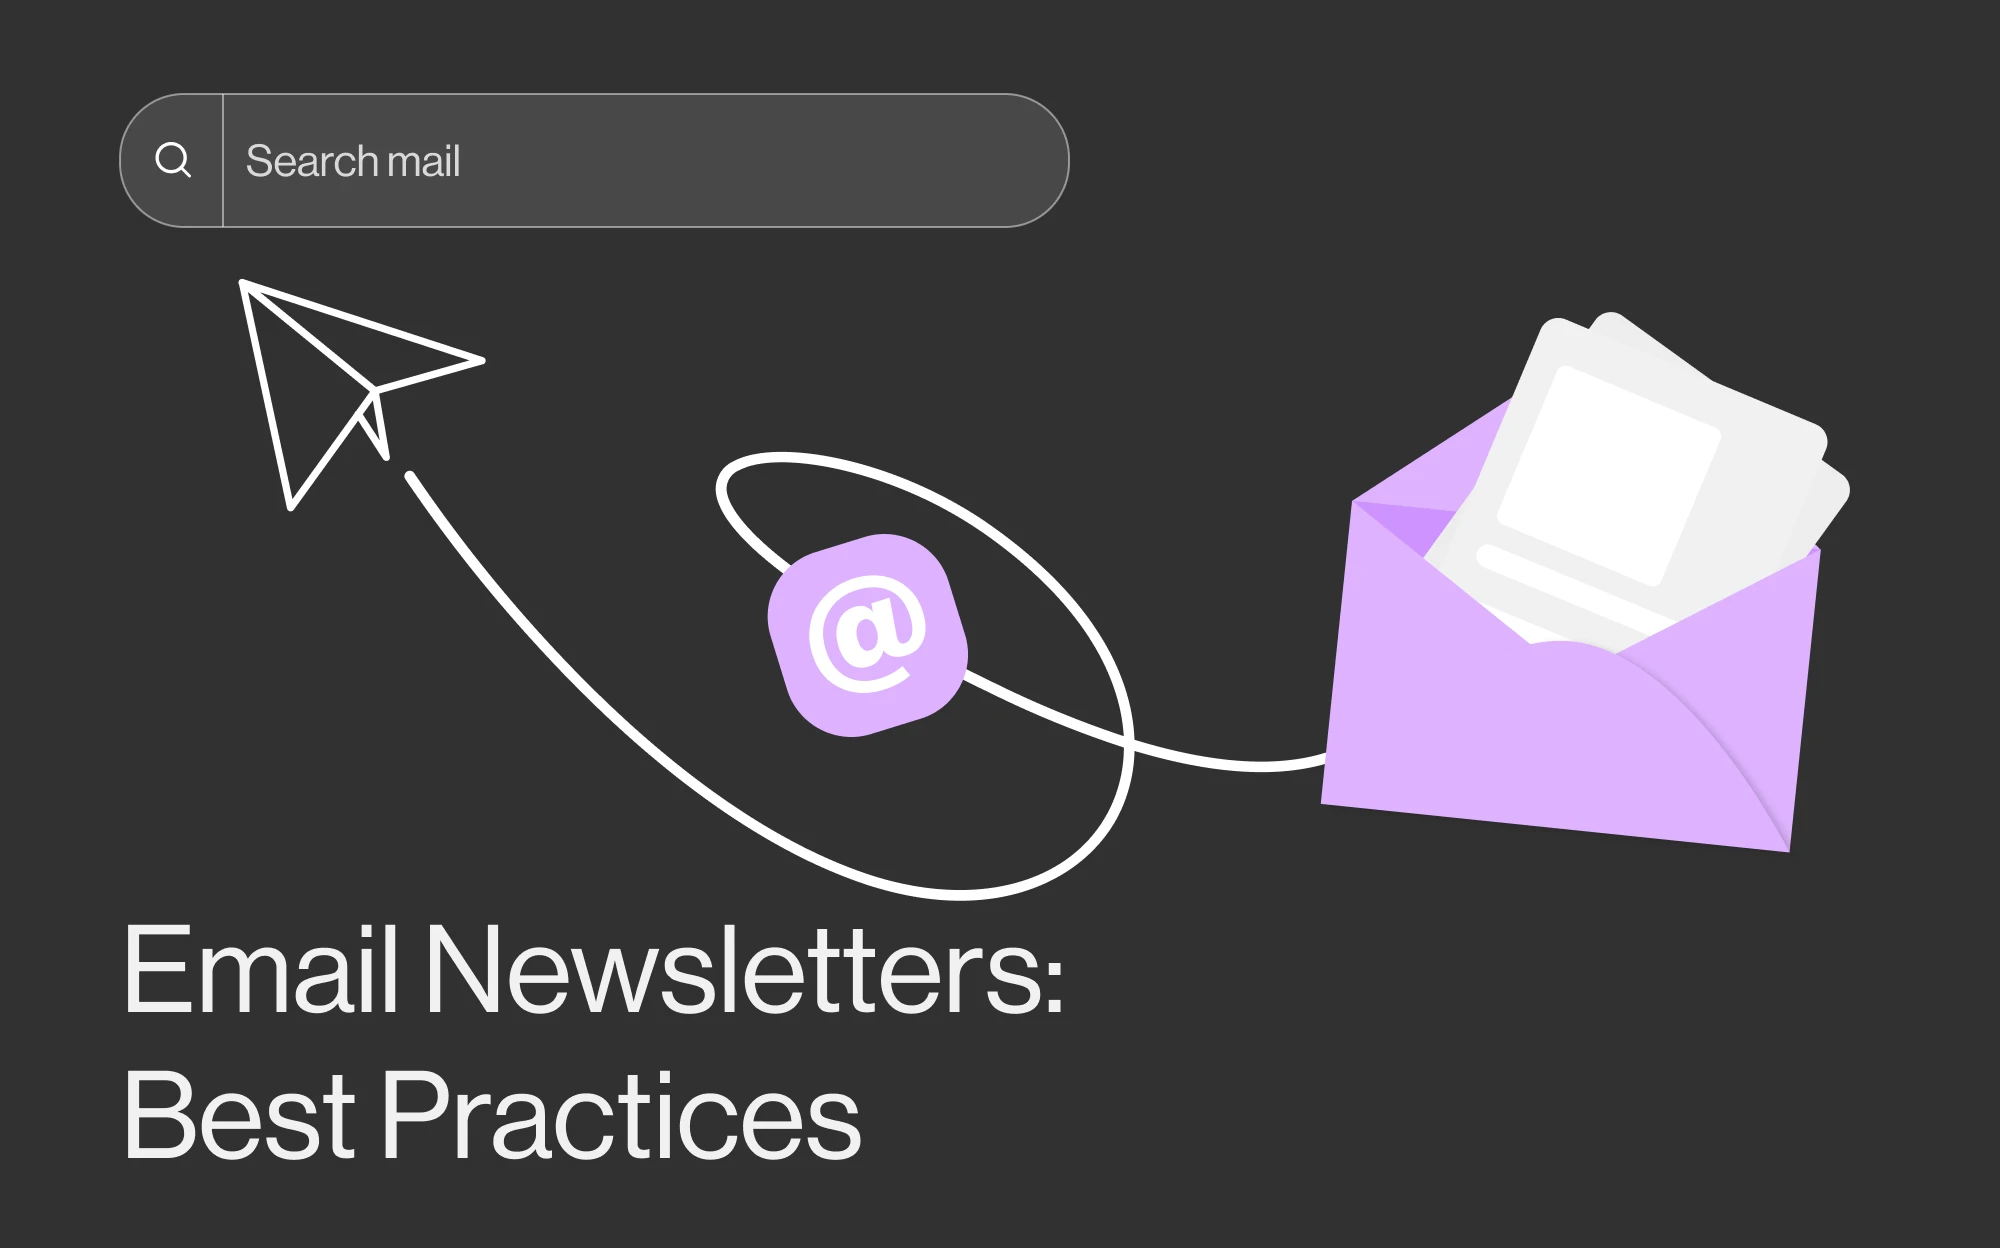 Monthly Newsletter Ideas to Engage Your Customers